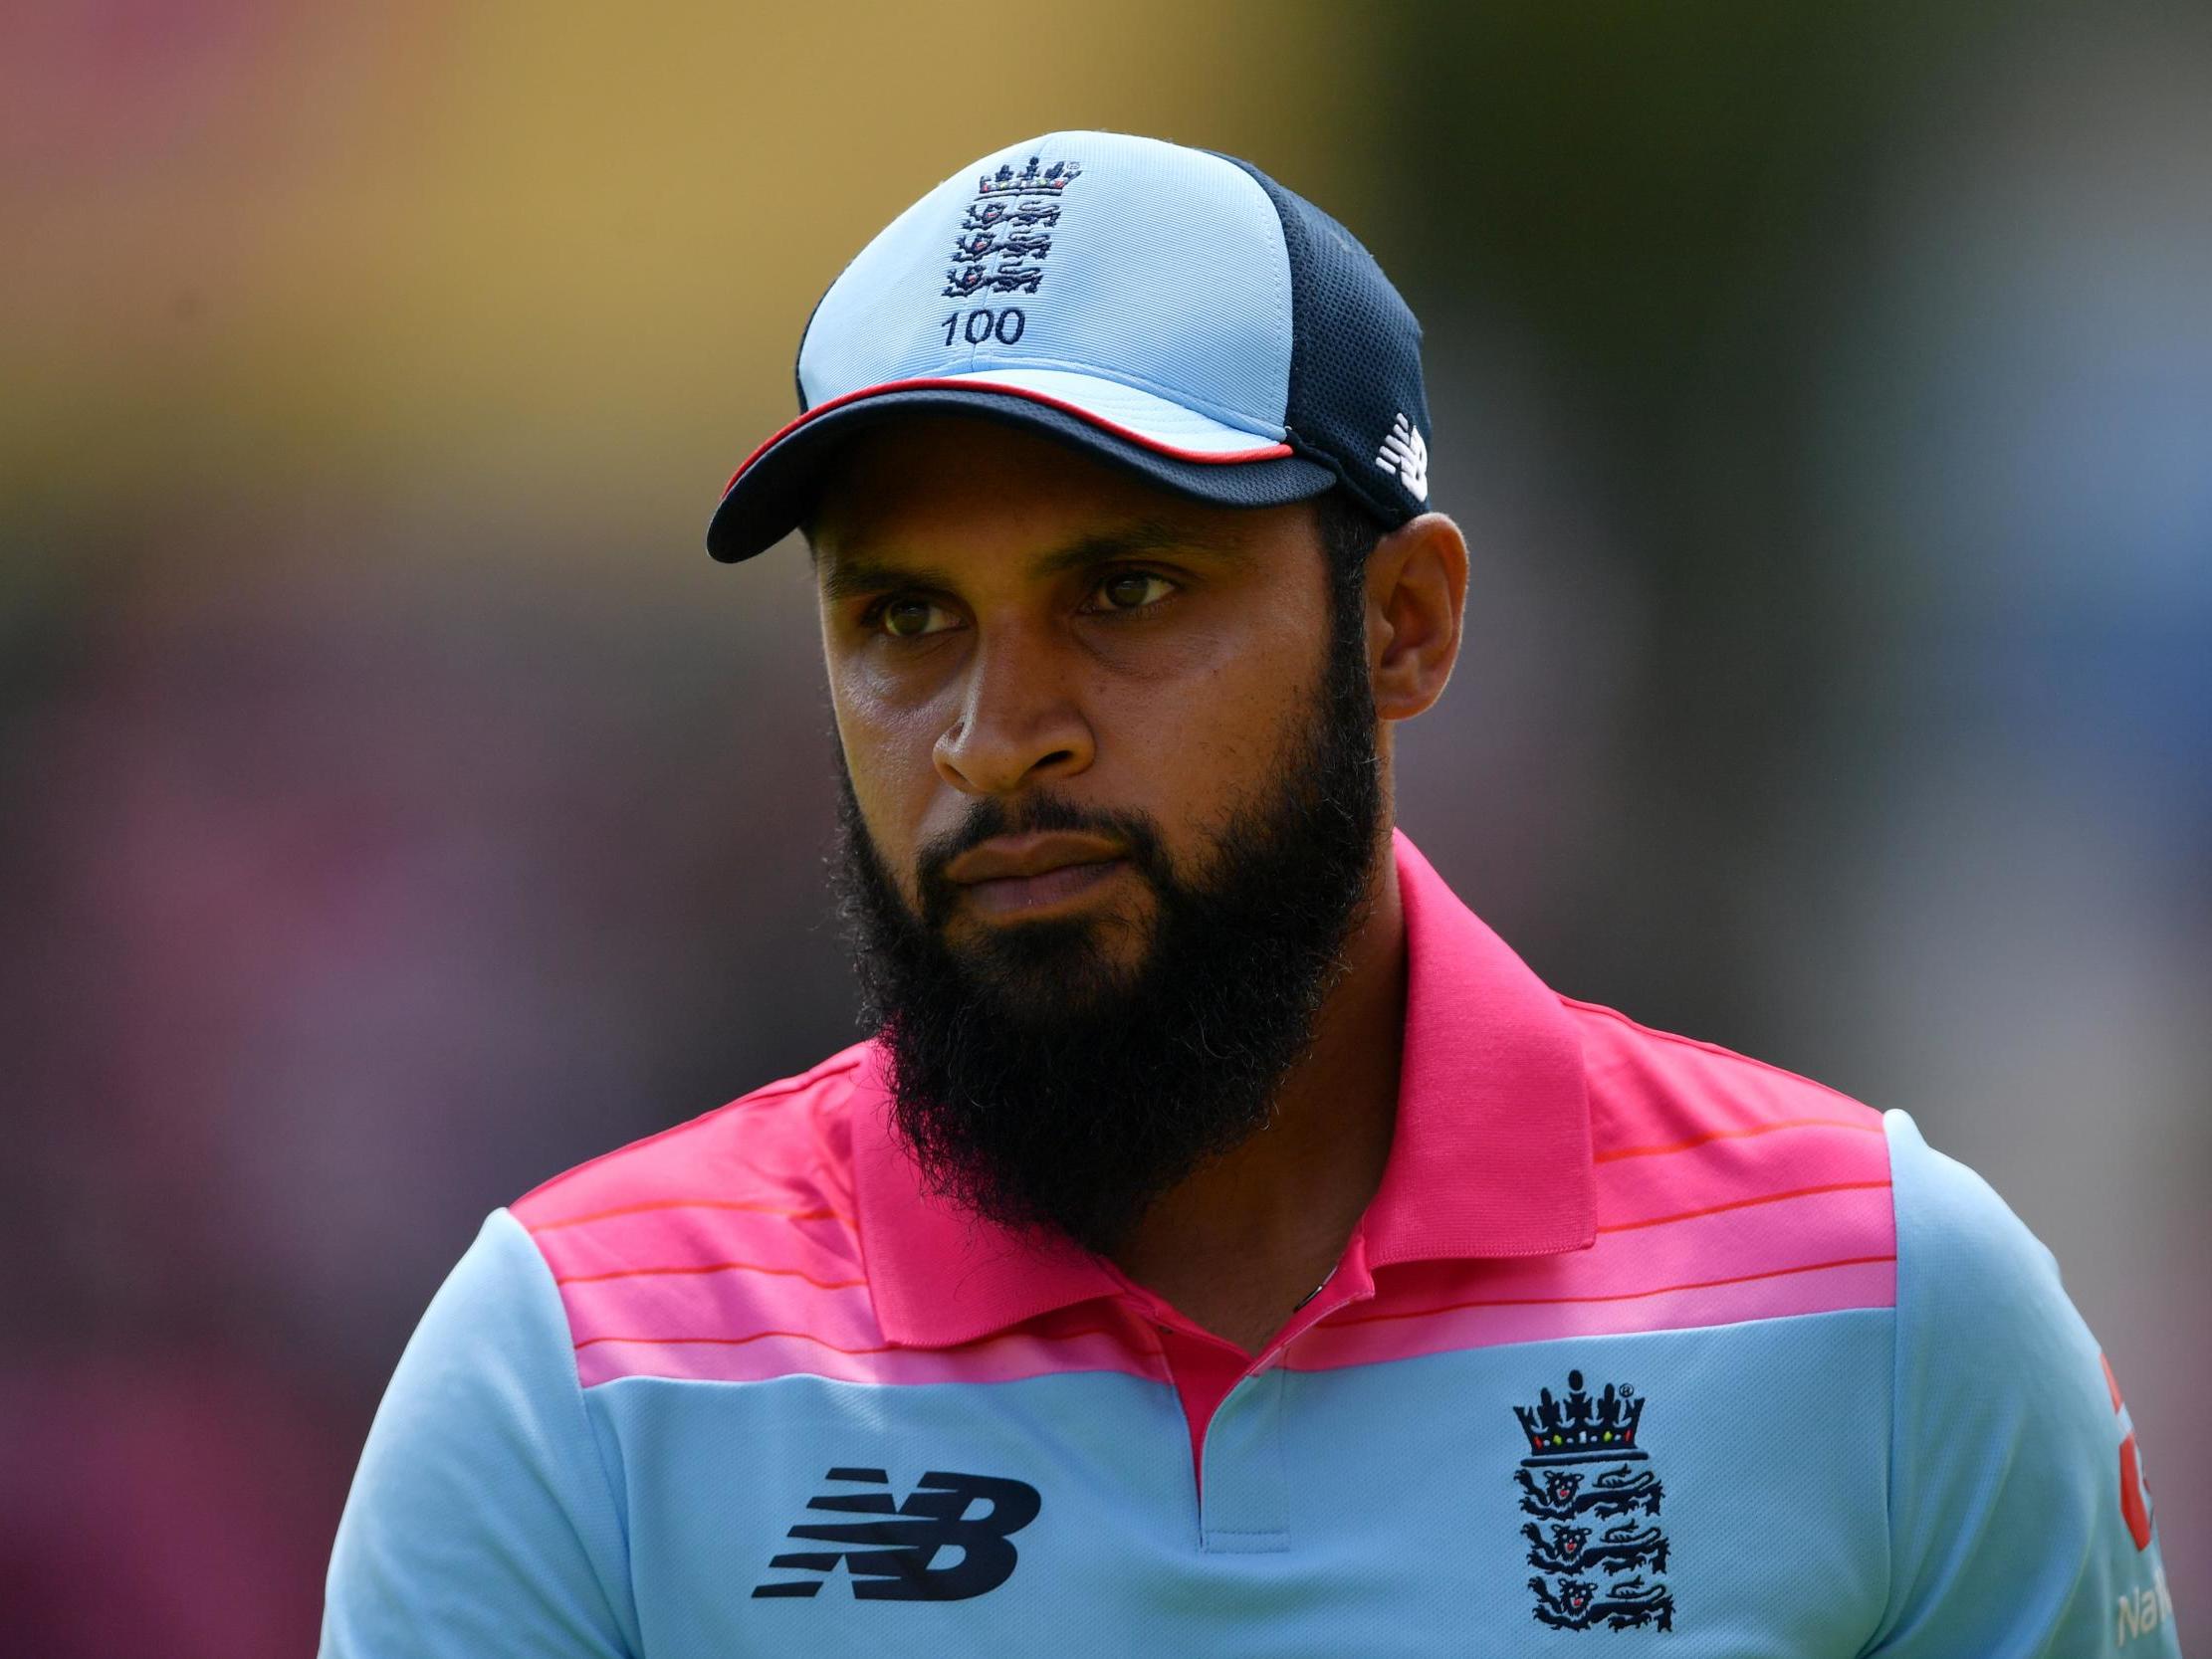 Adil Rashid is not tempted to try Test cricket again yet